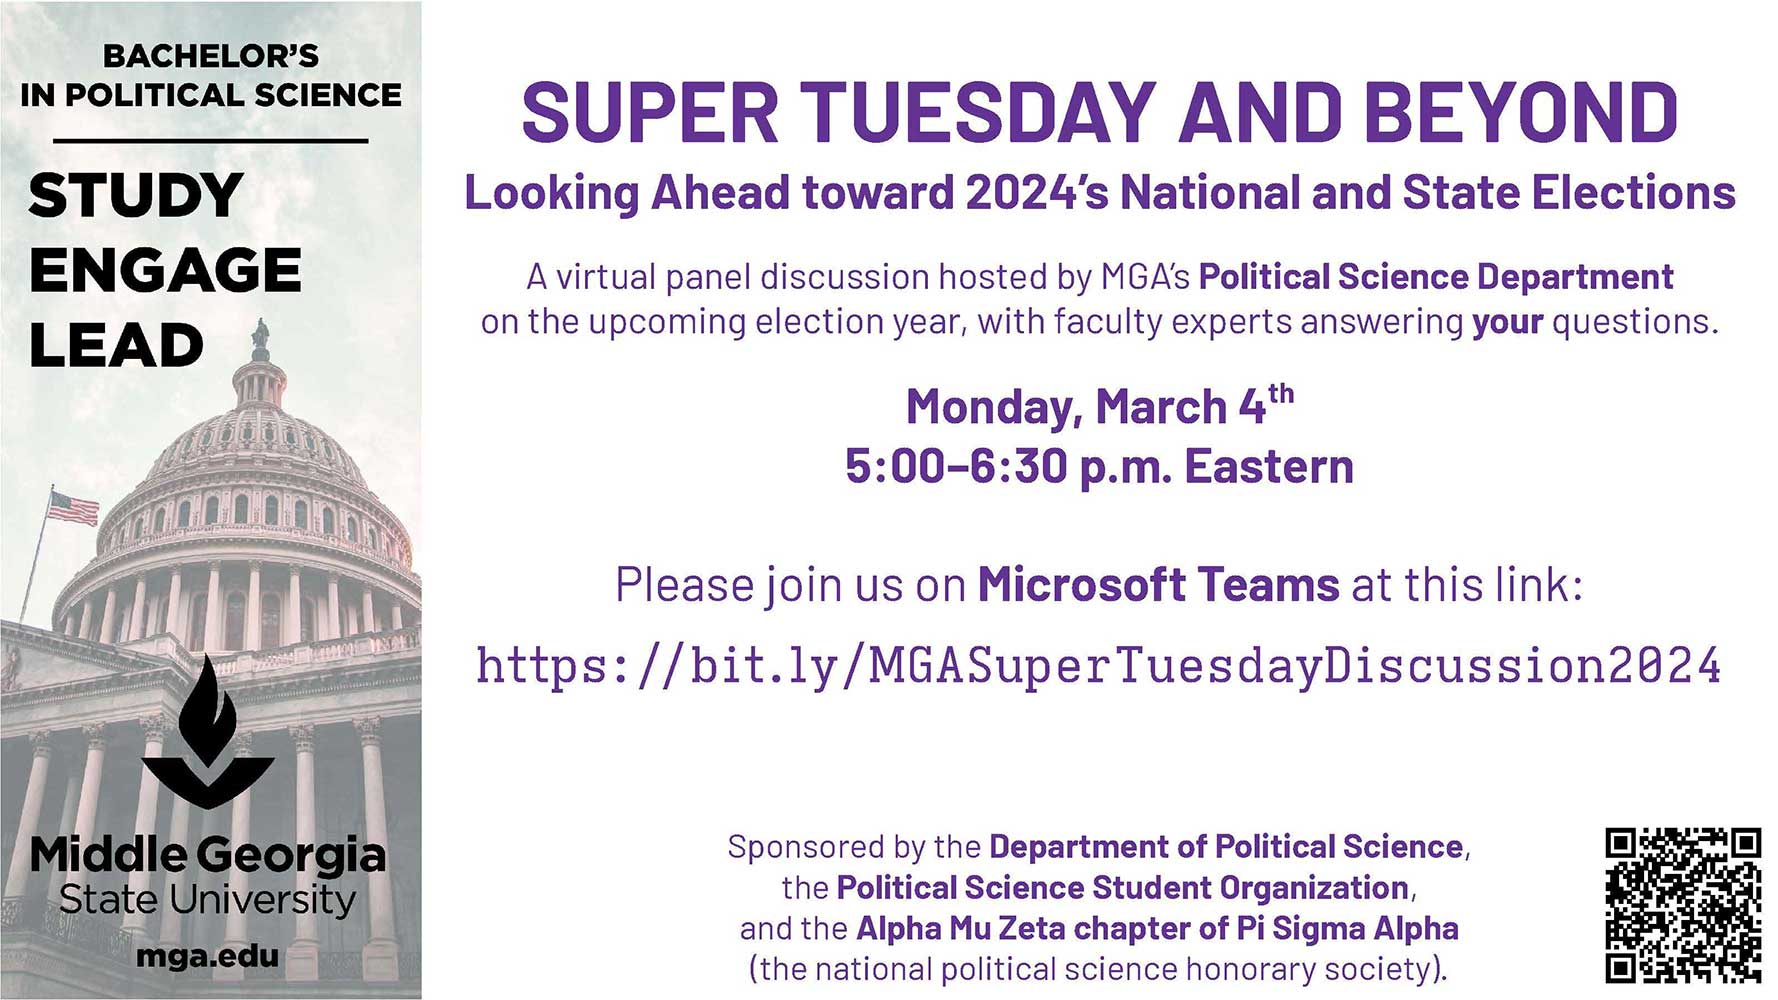 Super Tuesday and Beyond: Looking Ahead toward 2024’s National and State Elections flyer.